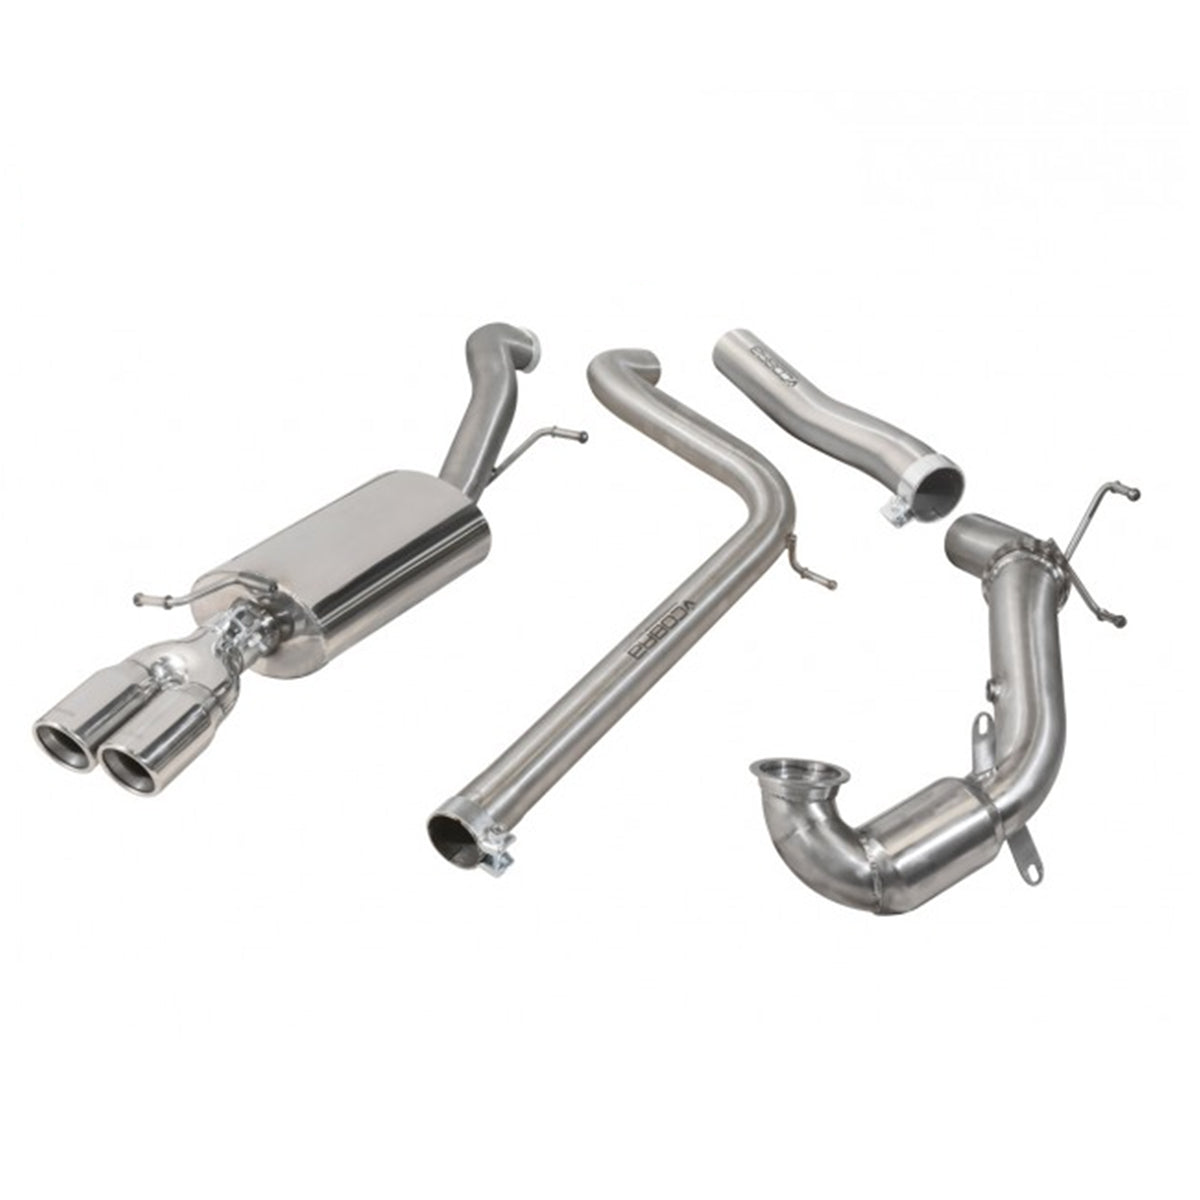 Performance sport exhaust for VW POLO 6R GTI, VW POLO 6R GTI 1.4 TSI  3d./5d. (180 Hp) 2010 ->, Volkswagen, exhaust systems